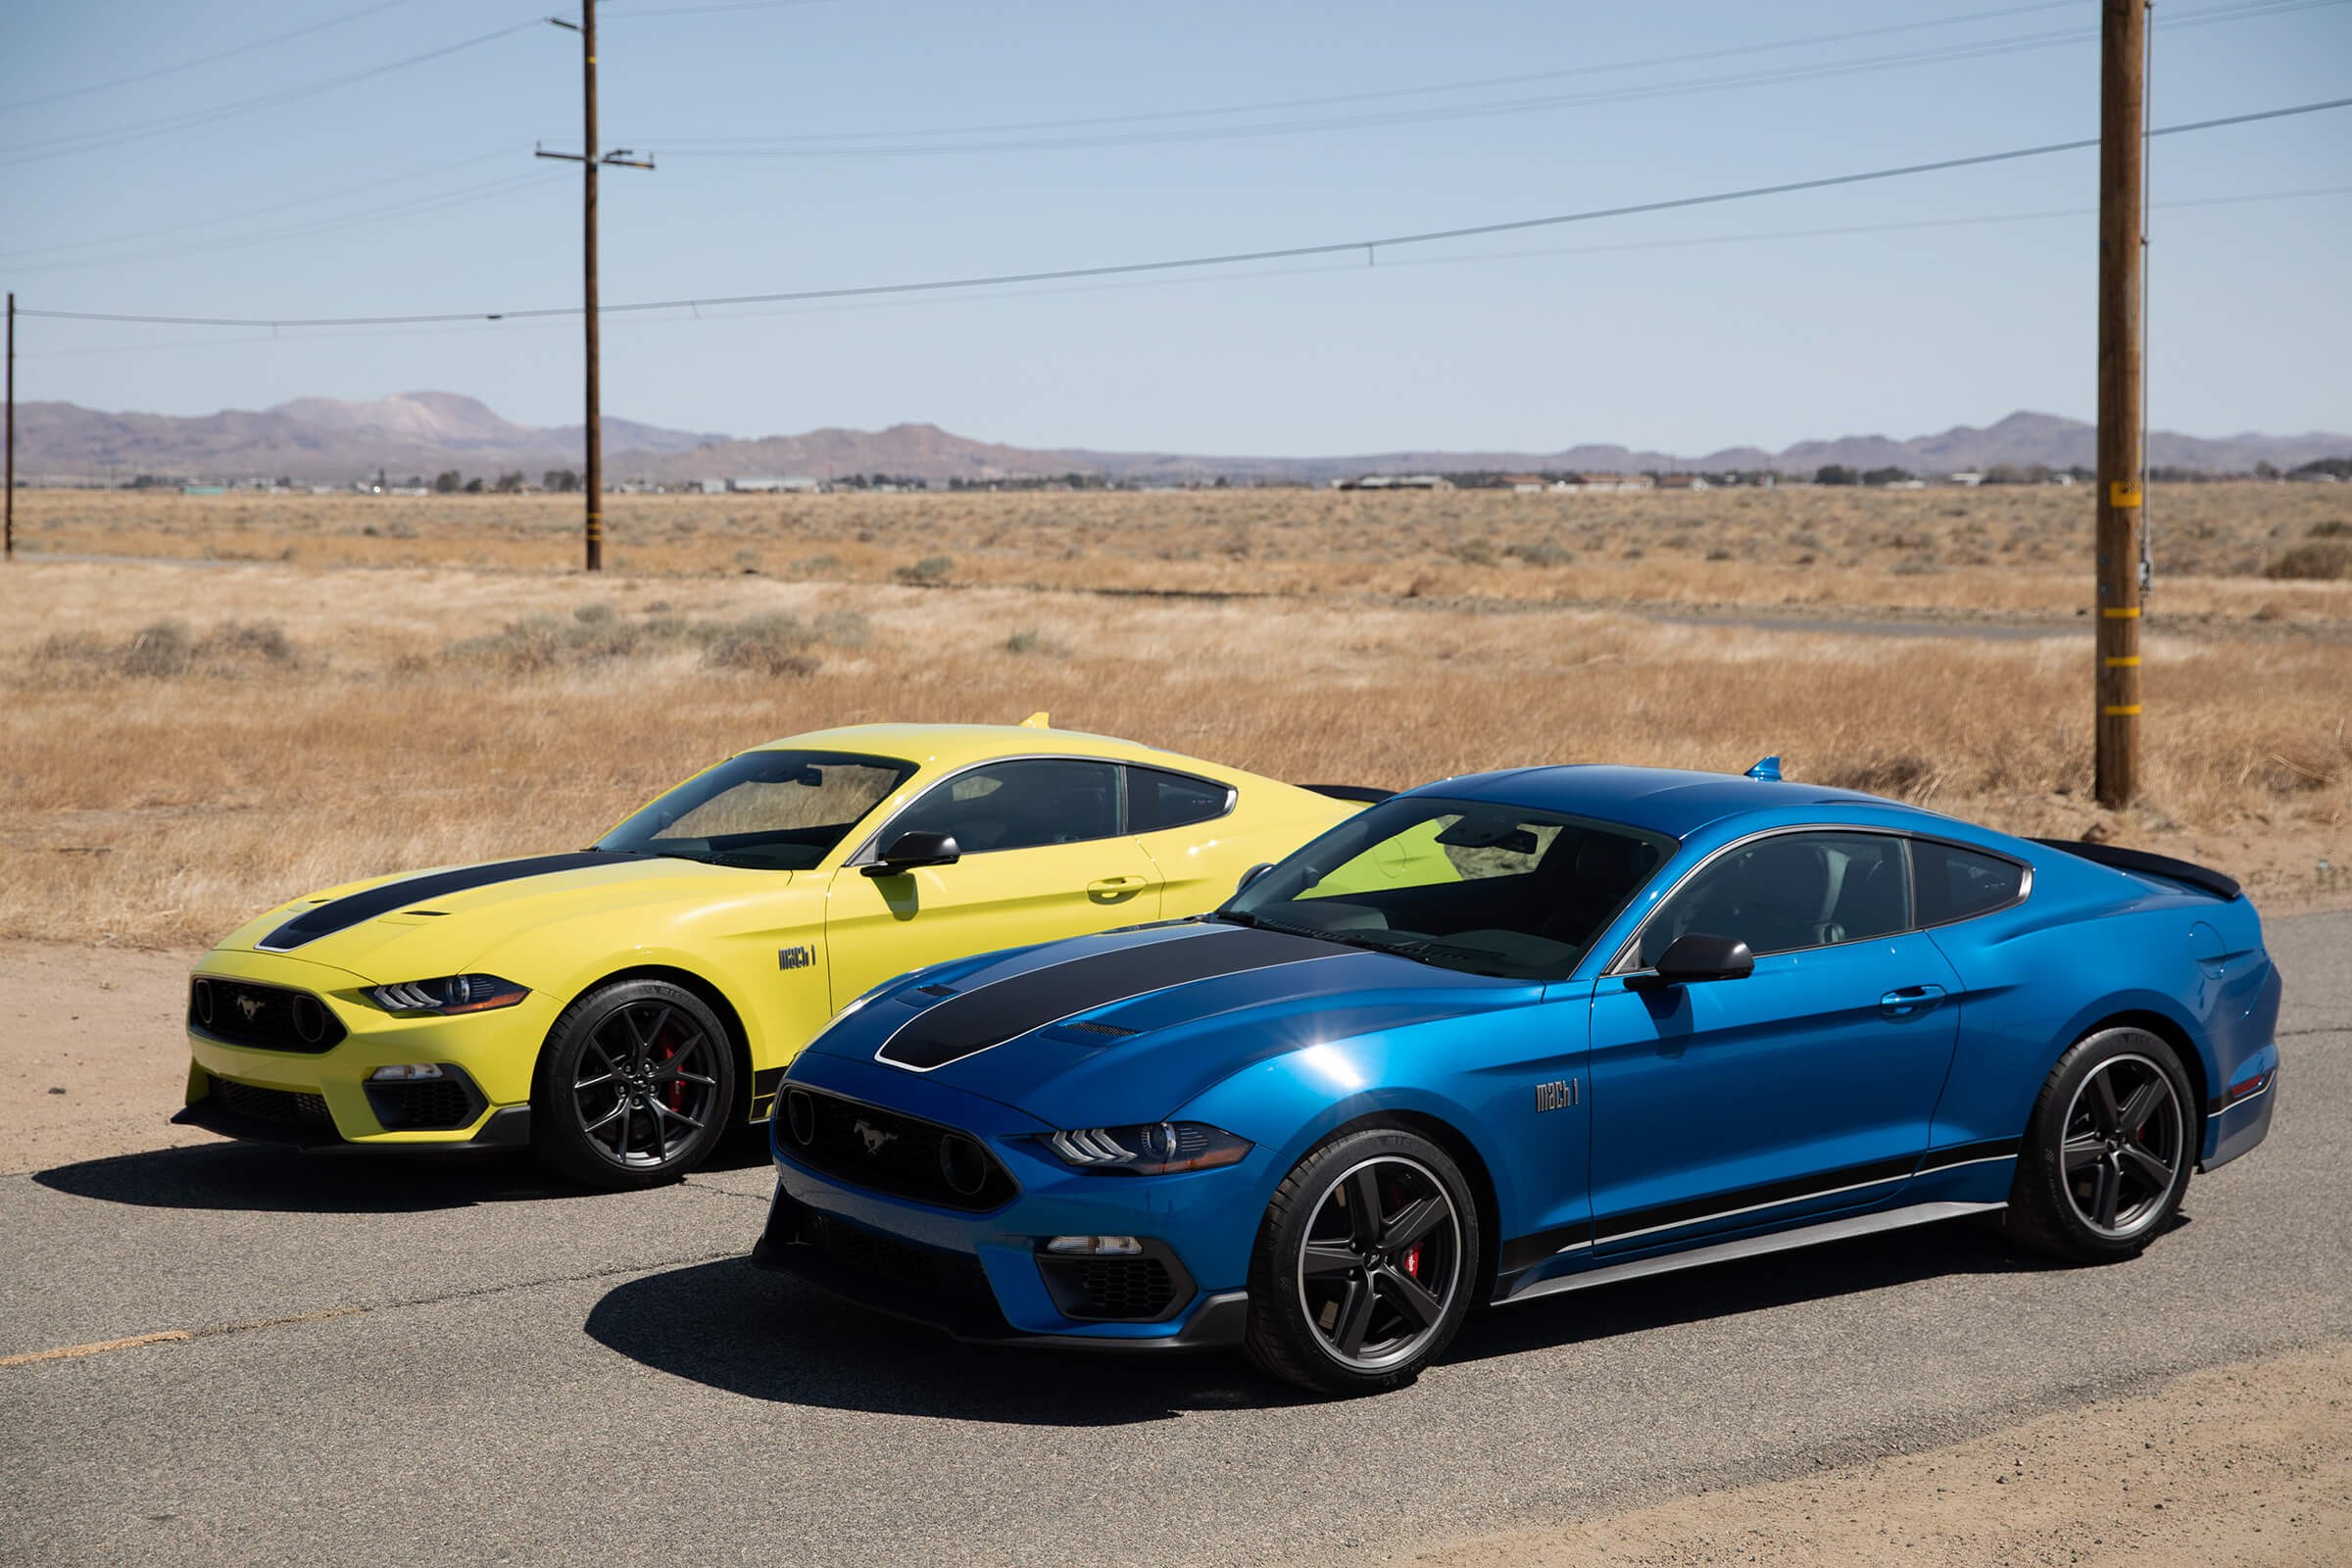 Yellow and Blue 2021 Ford Mustang Mach 1 Parked Side by Side